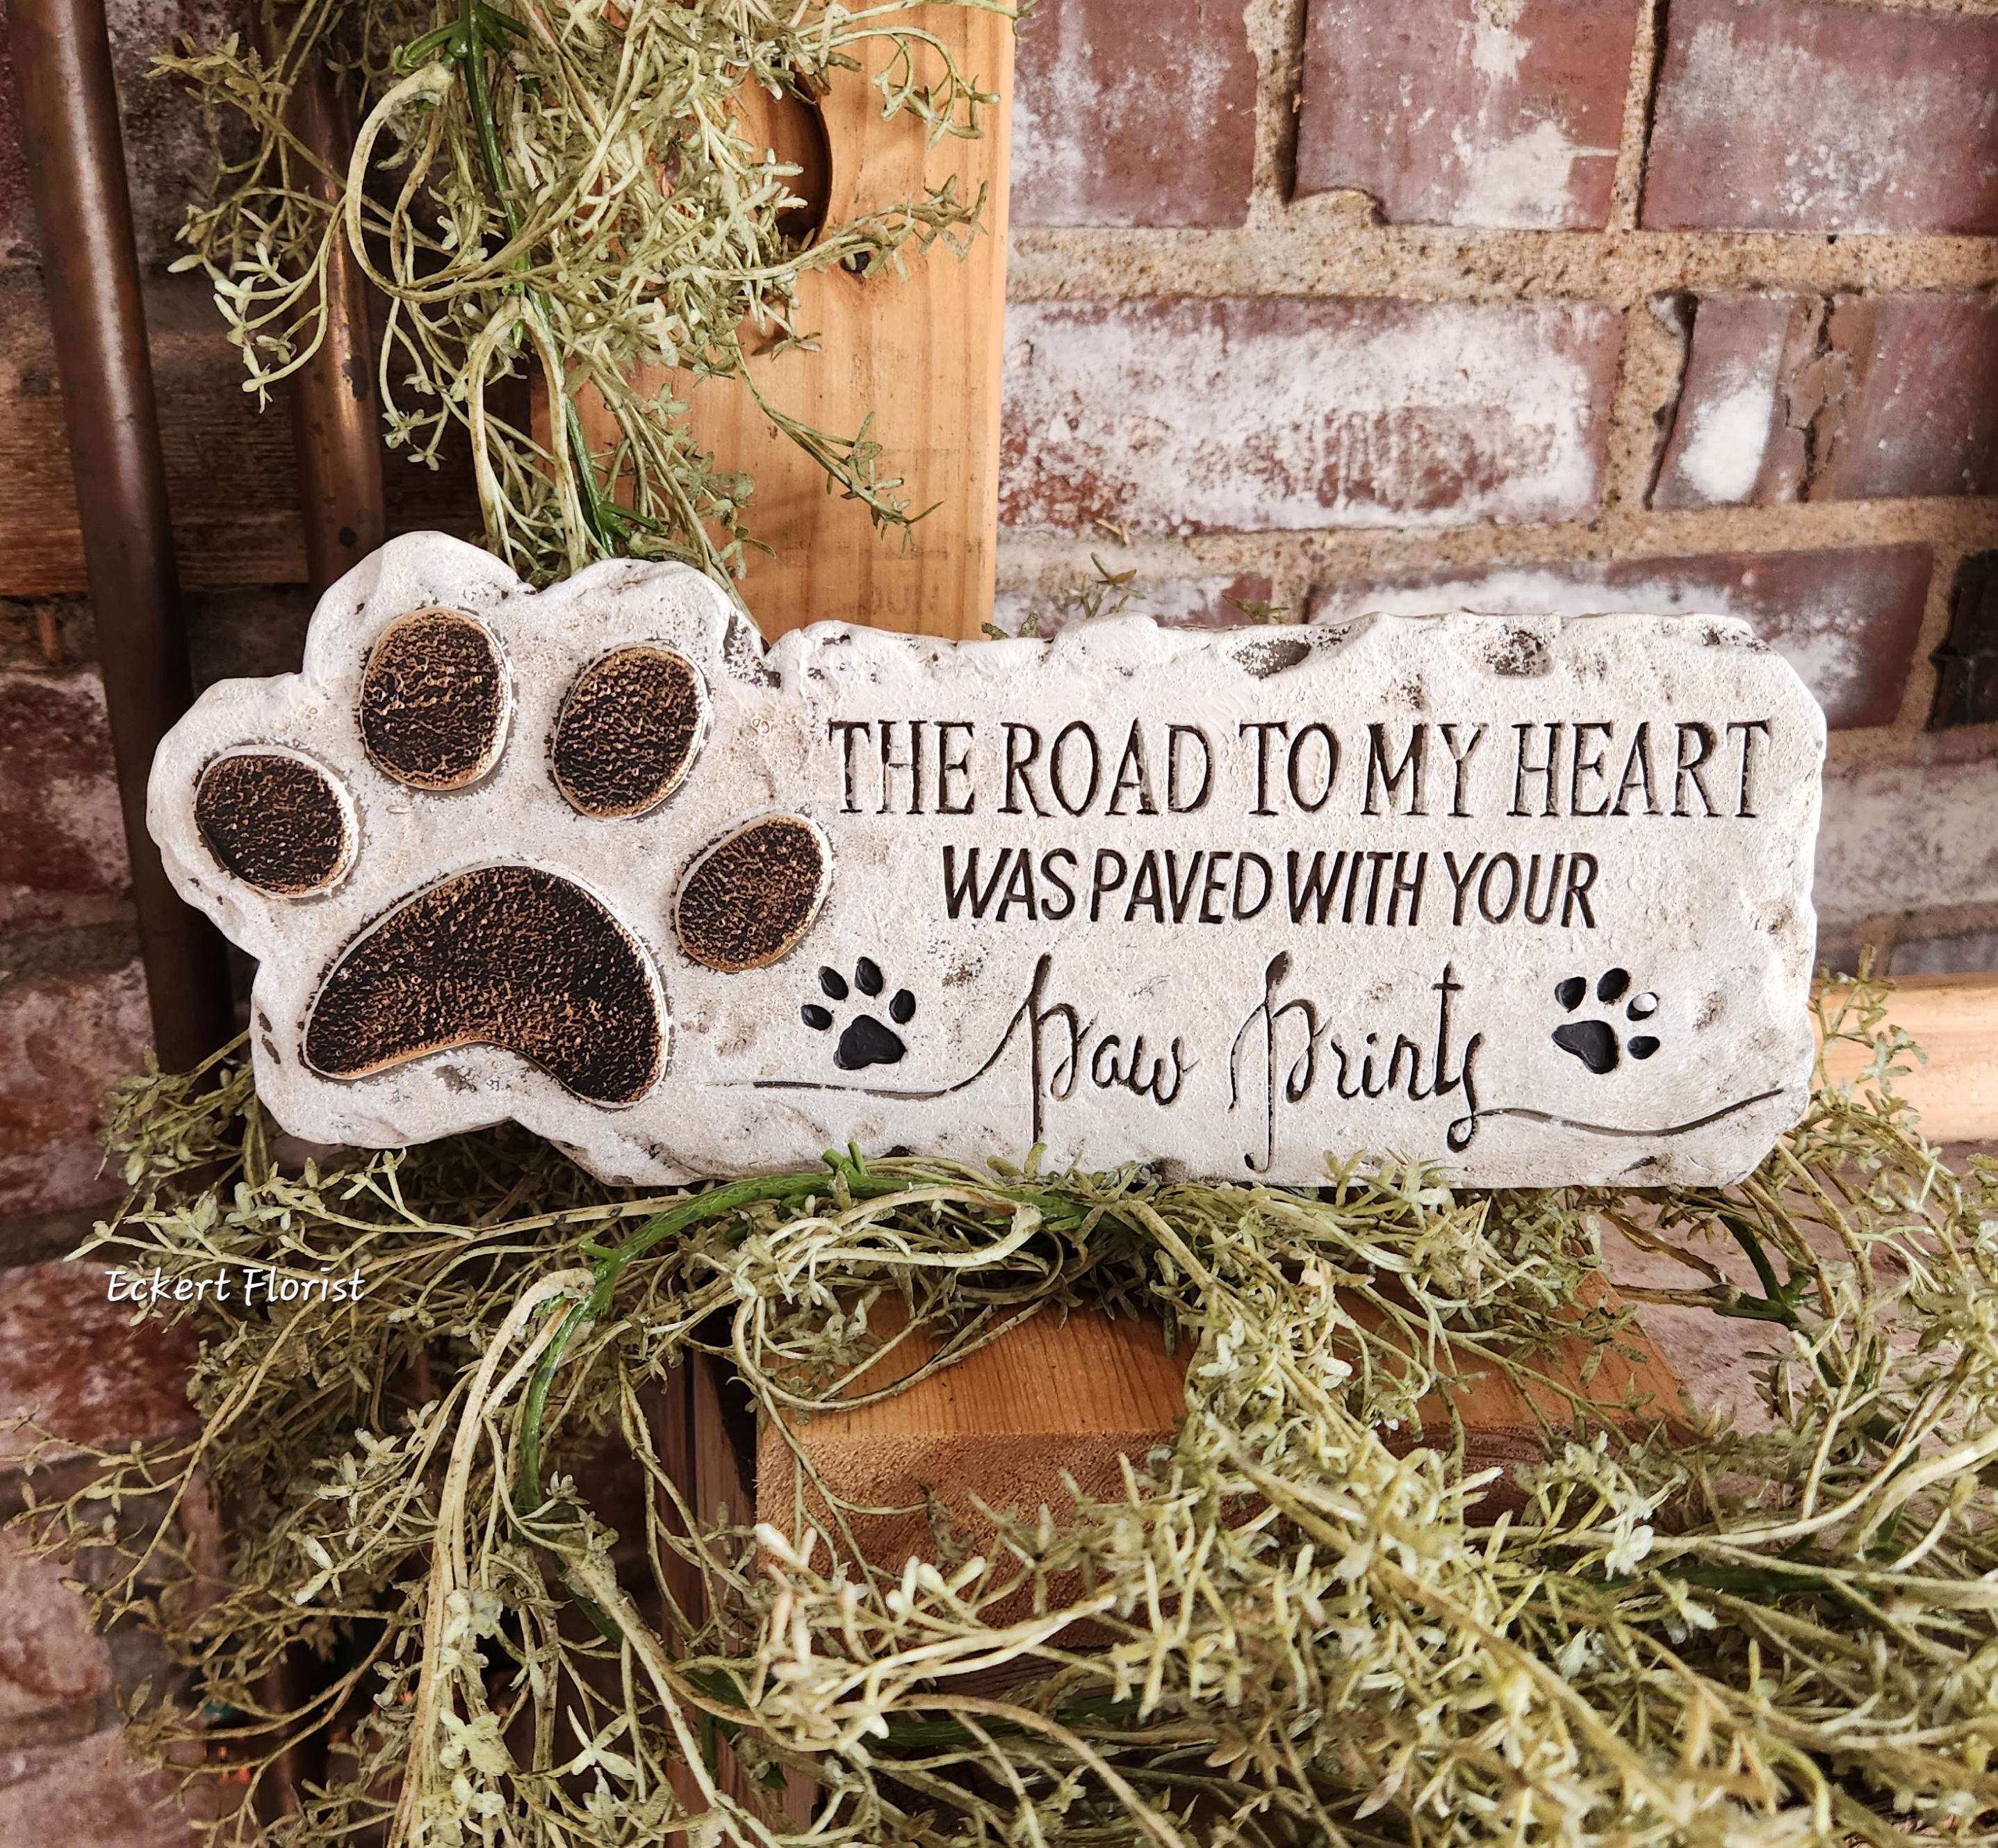 Eckert Florist's The Road To My Heart Pet Memorial Stone in  Belleville, IL